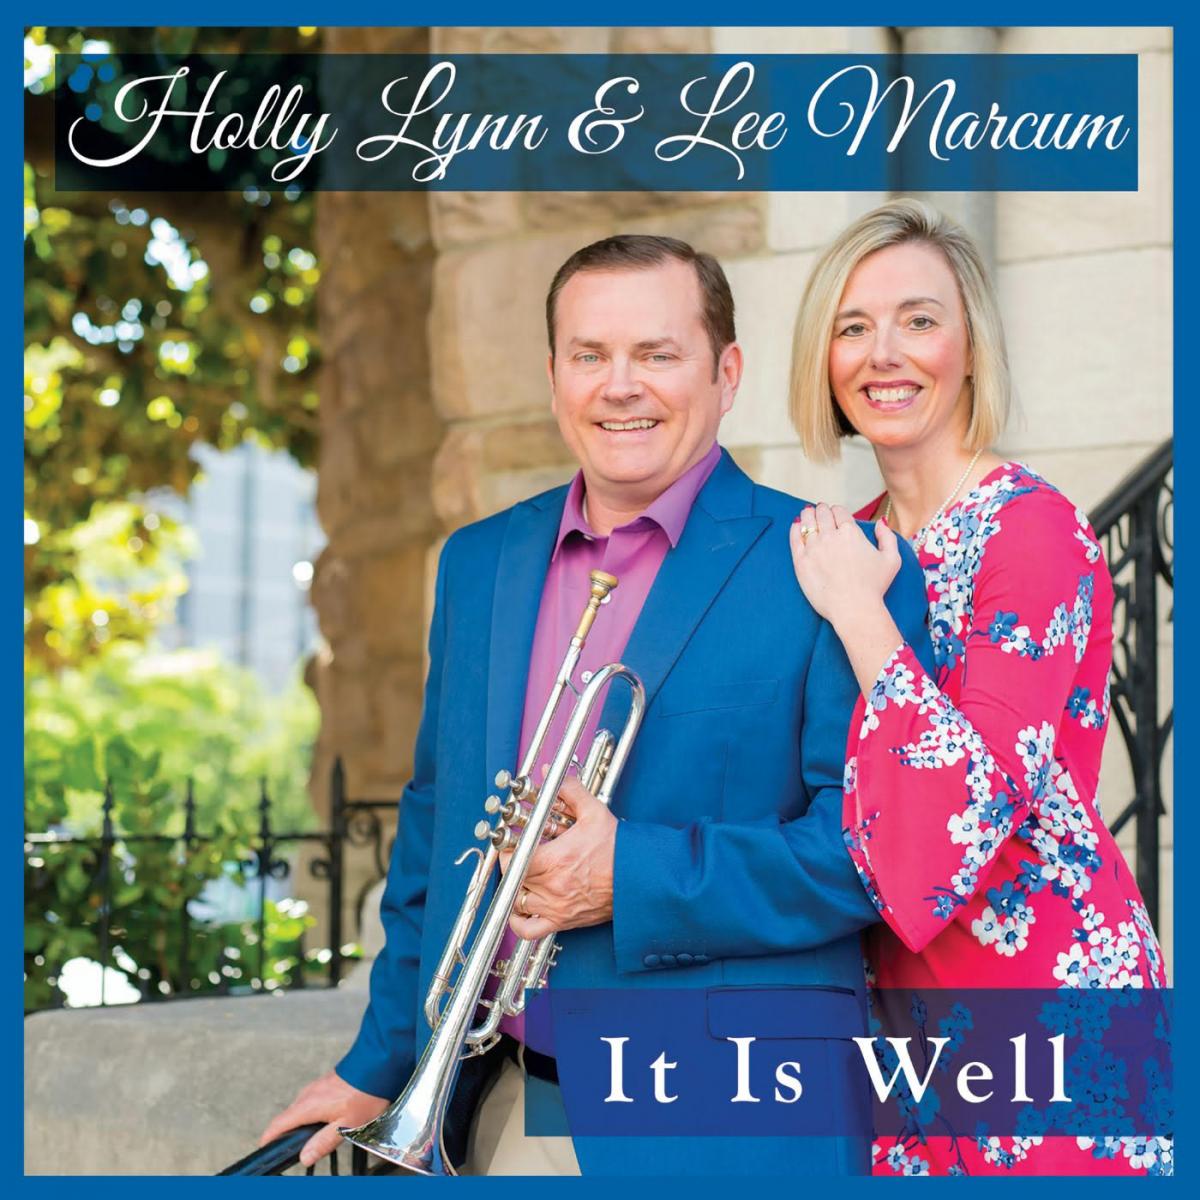 Cover of album "It is Well" by Lee and Holly Lynn Marcum 